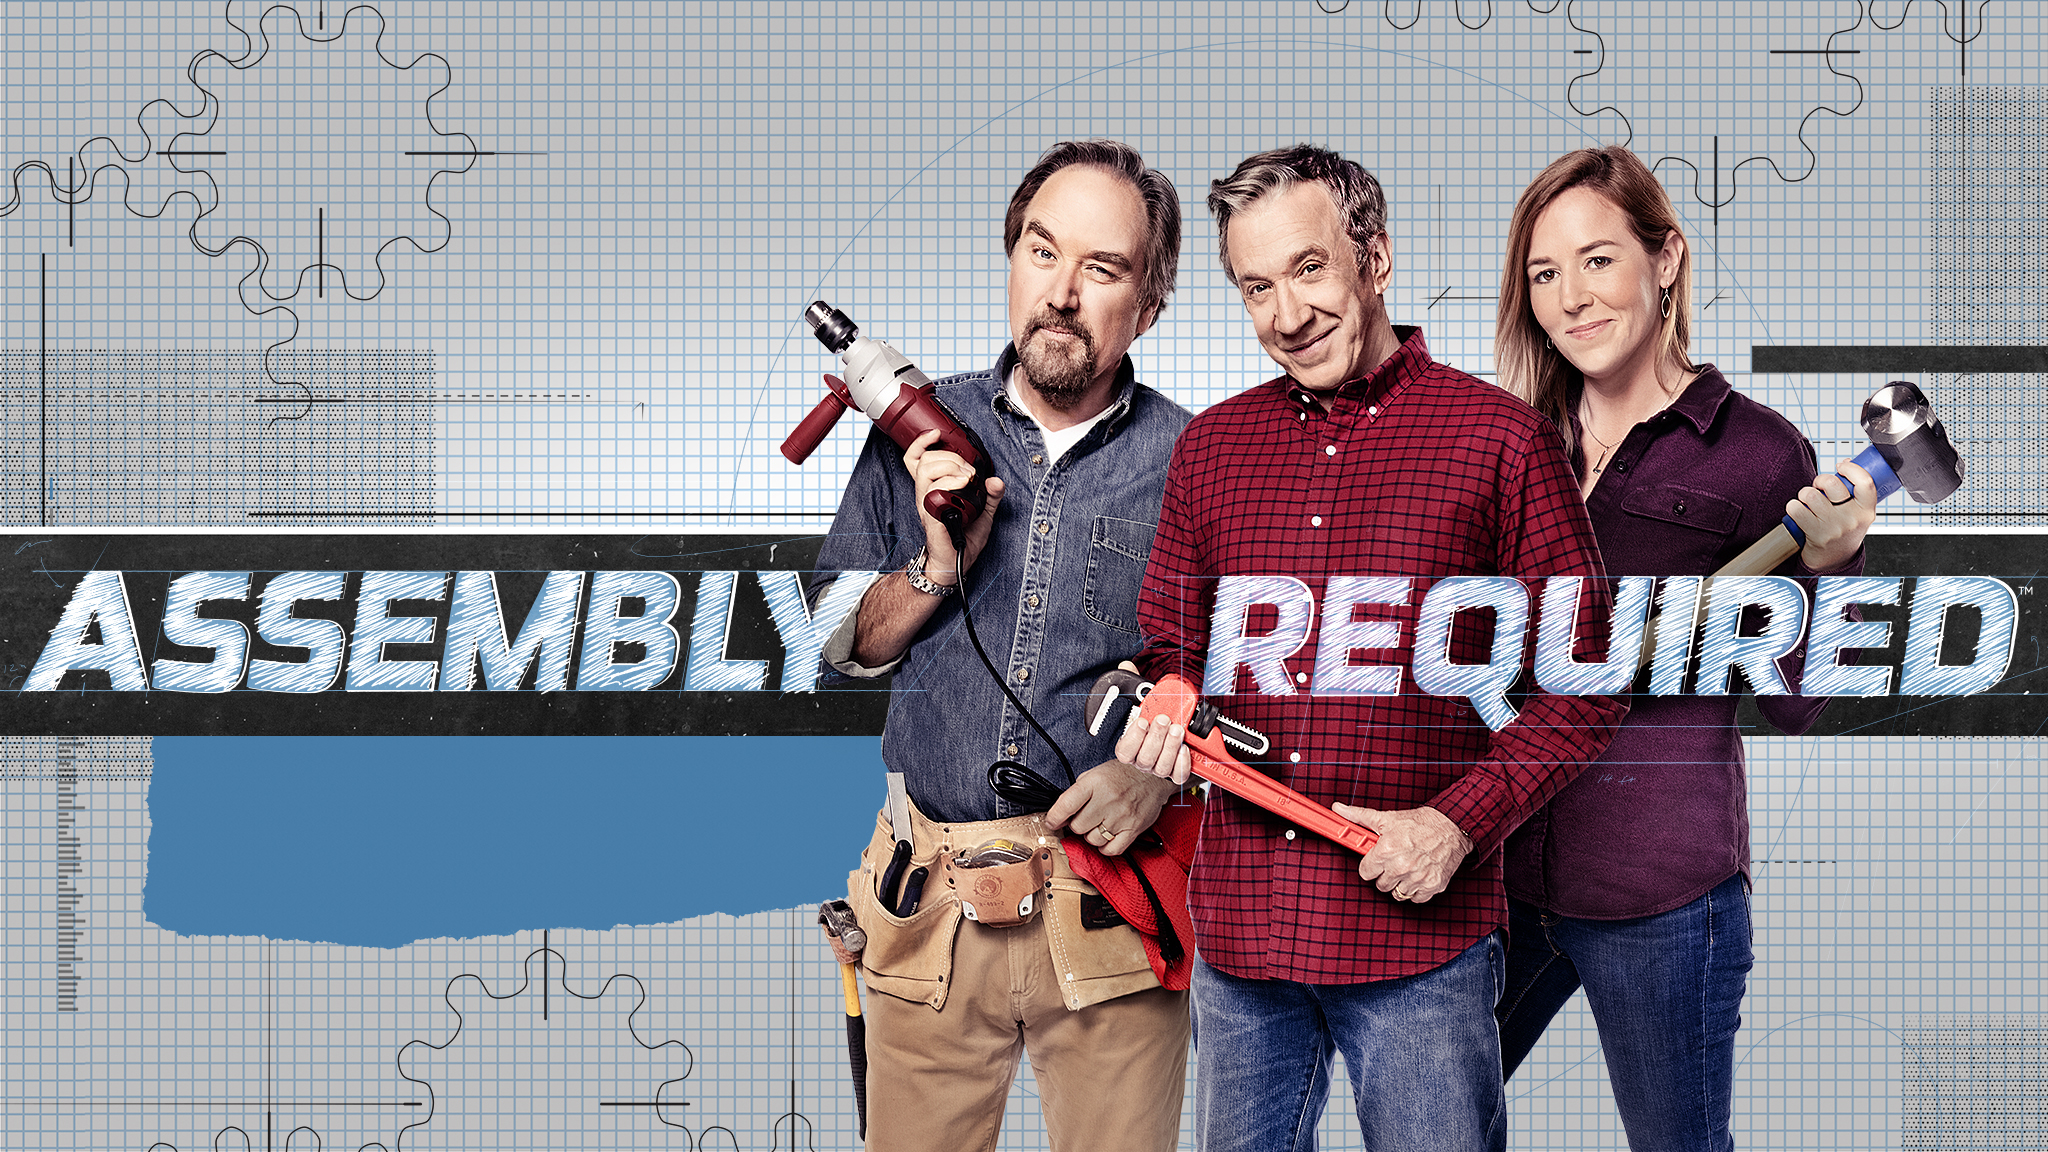 Assembly Required Hosts Richard Karn, Tim Allen and April Wilkerson